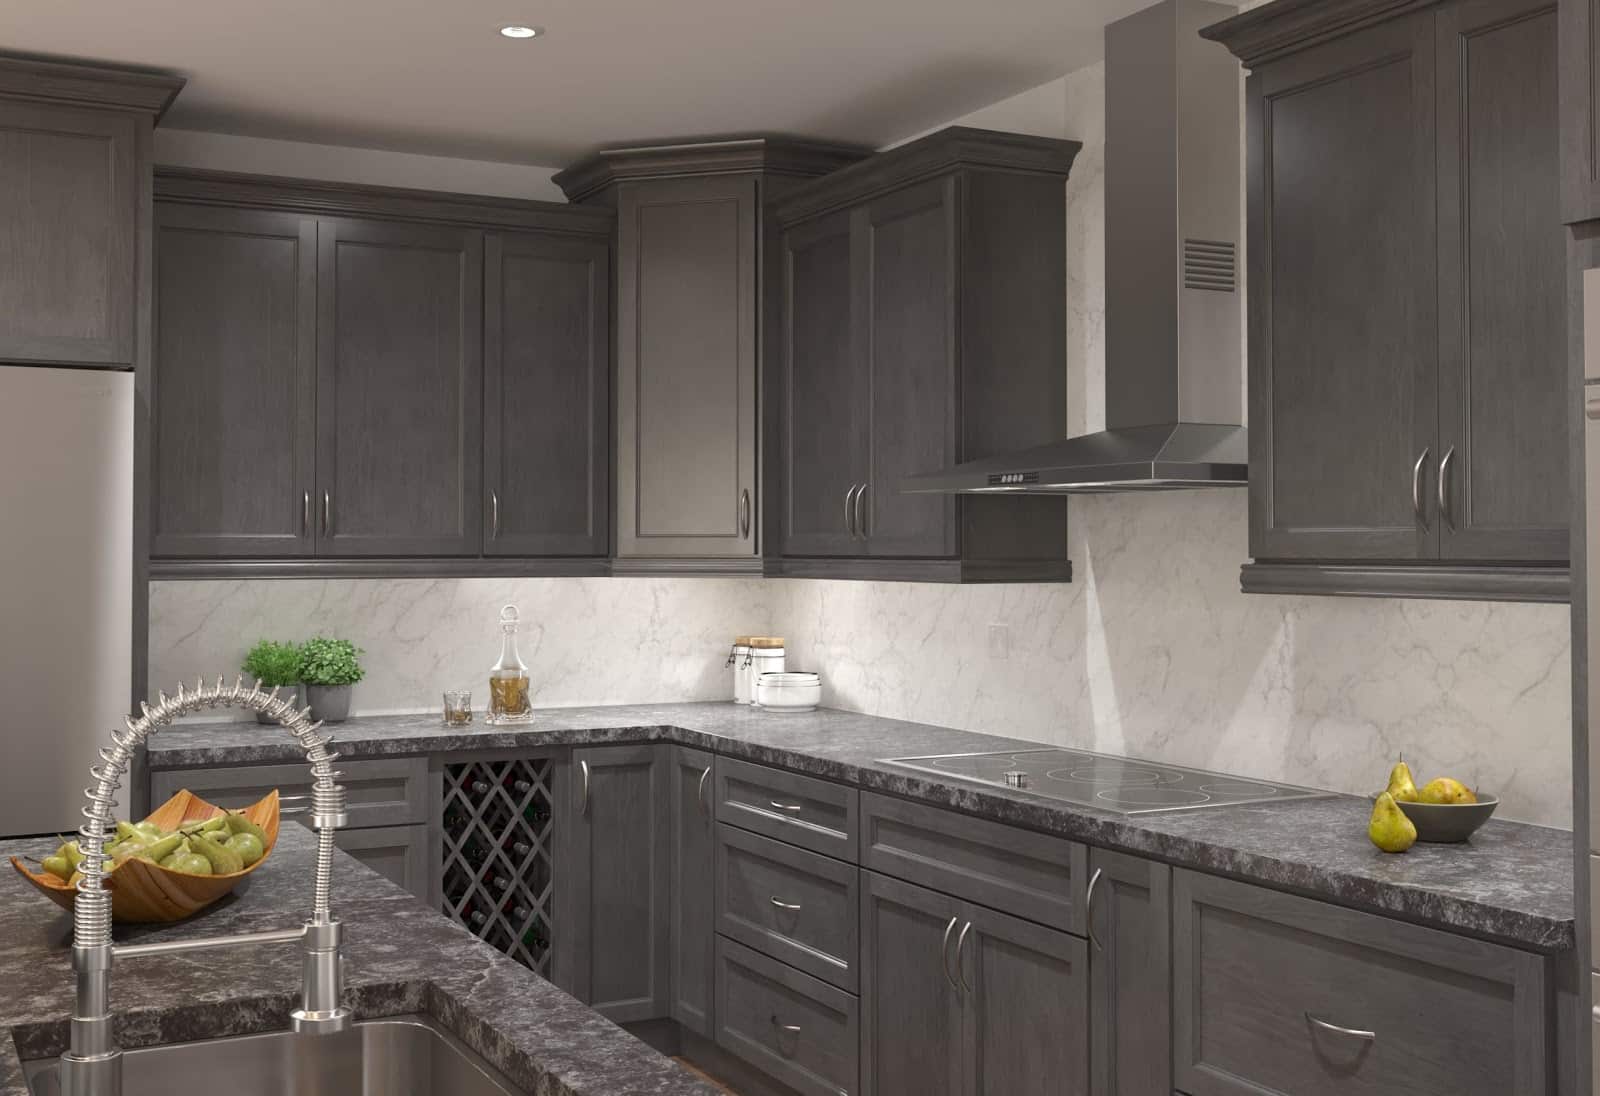 3 Places to Get Dirt Cheap Kitchen Cabinets - RTA Cabinet Blog